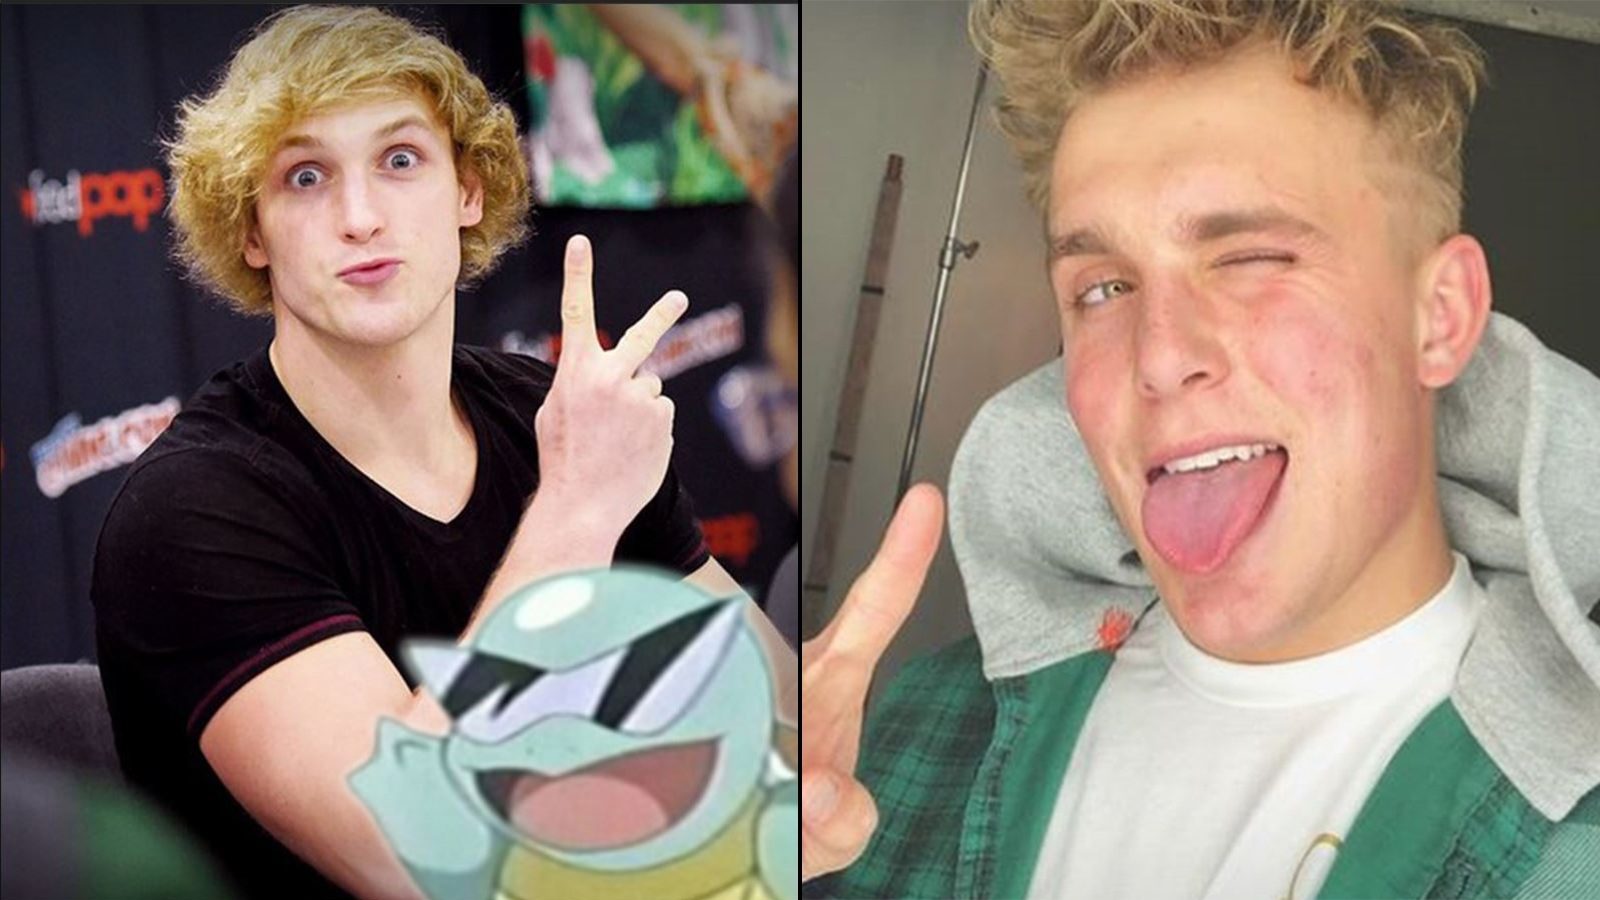 Logan Paul gets his first tattoo with hilarious input from Jake Paul   Dexerto